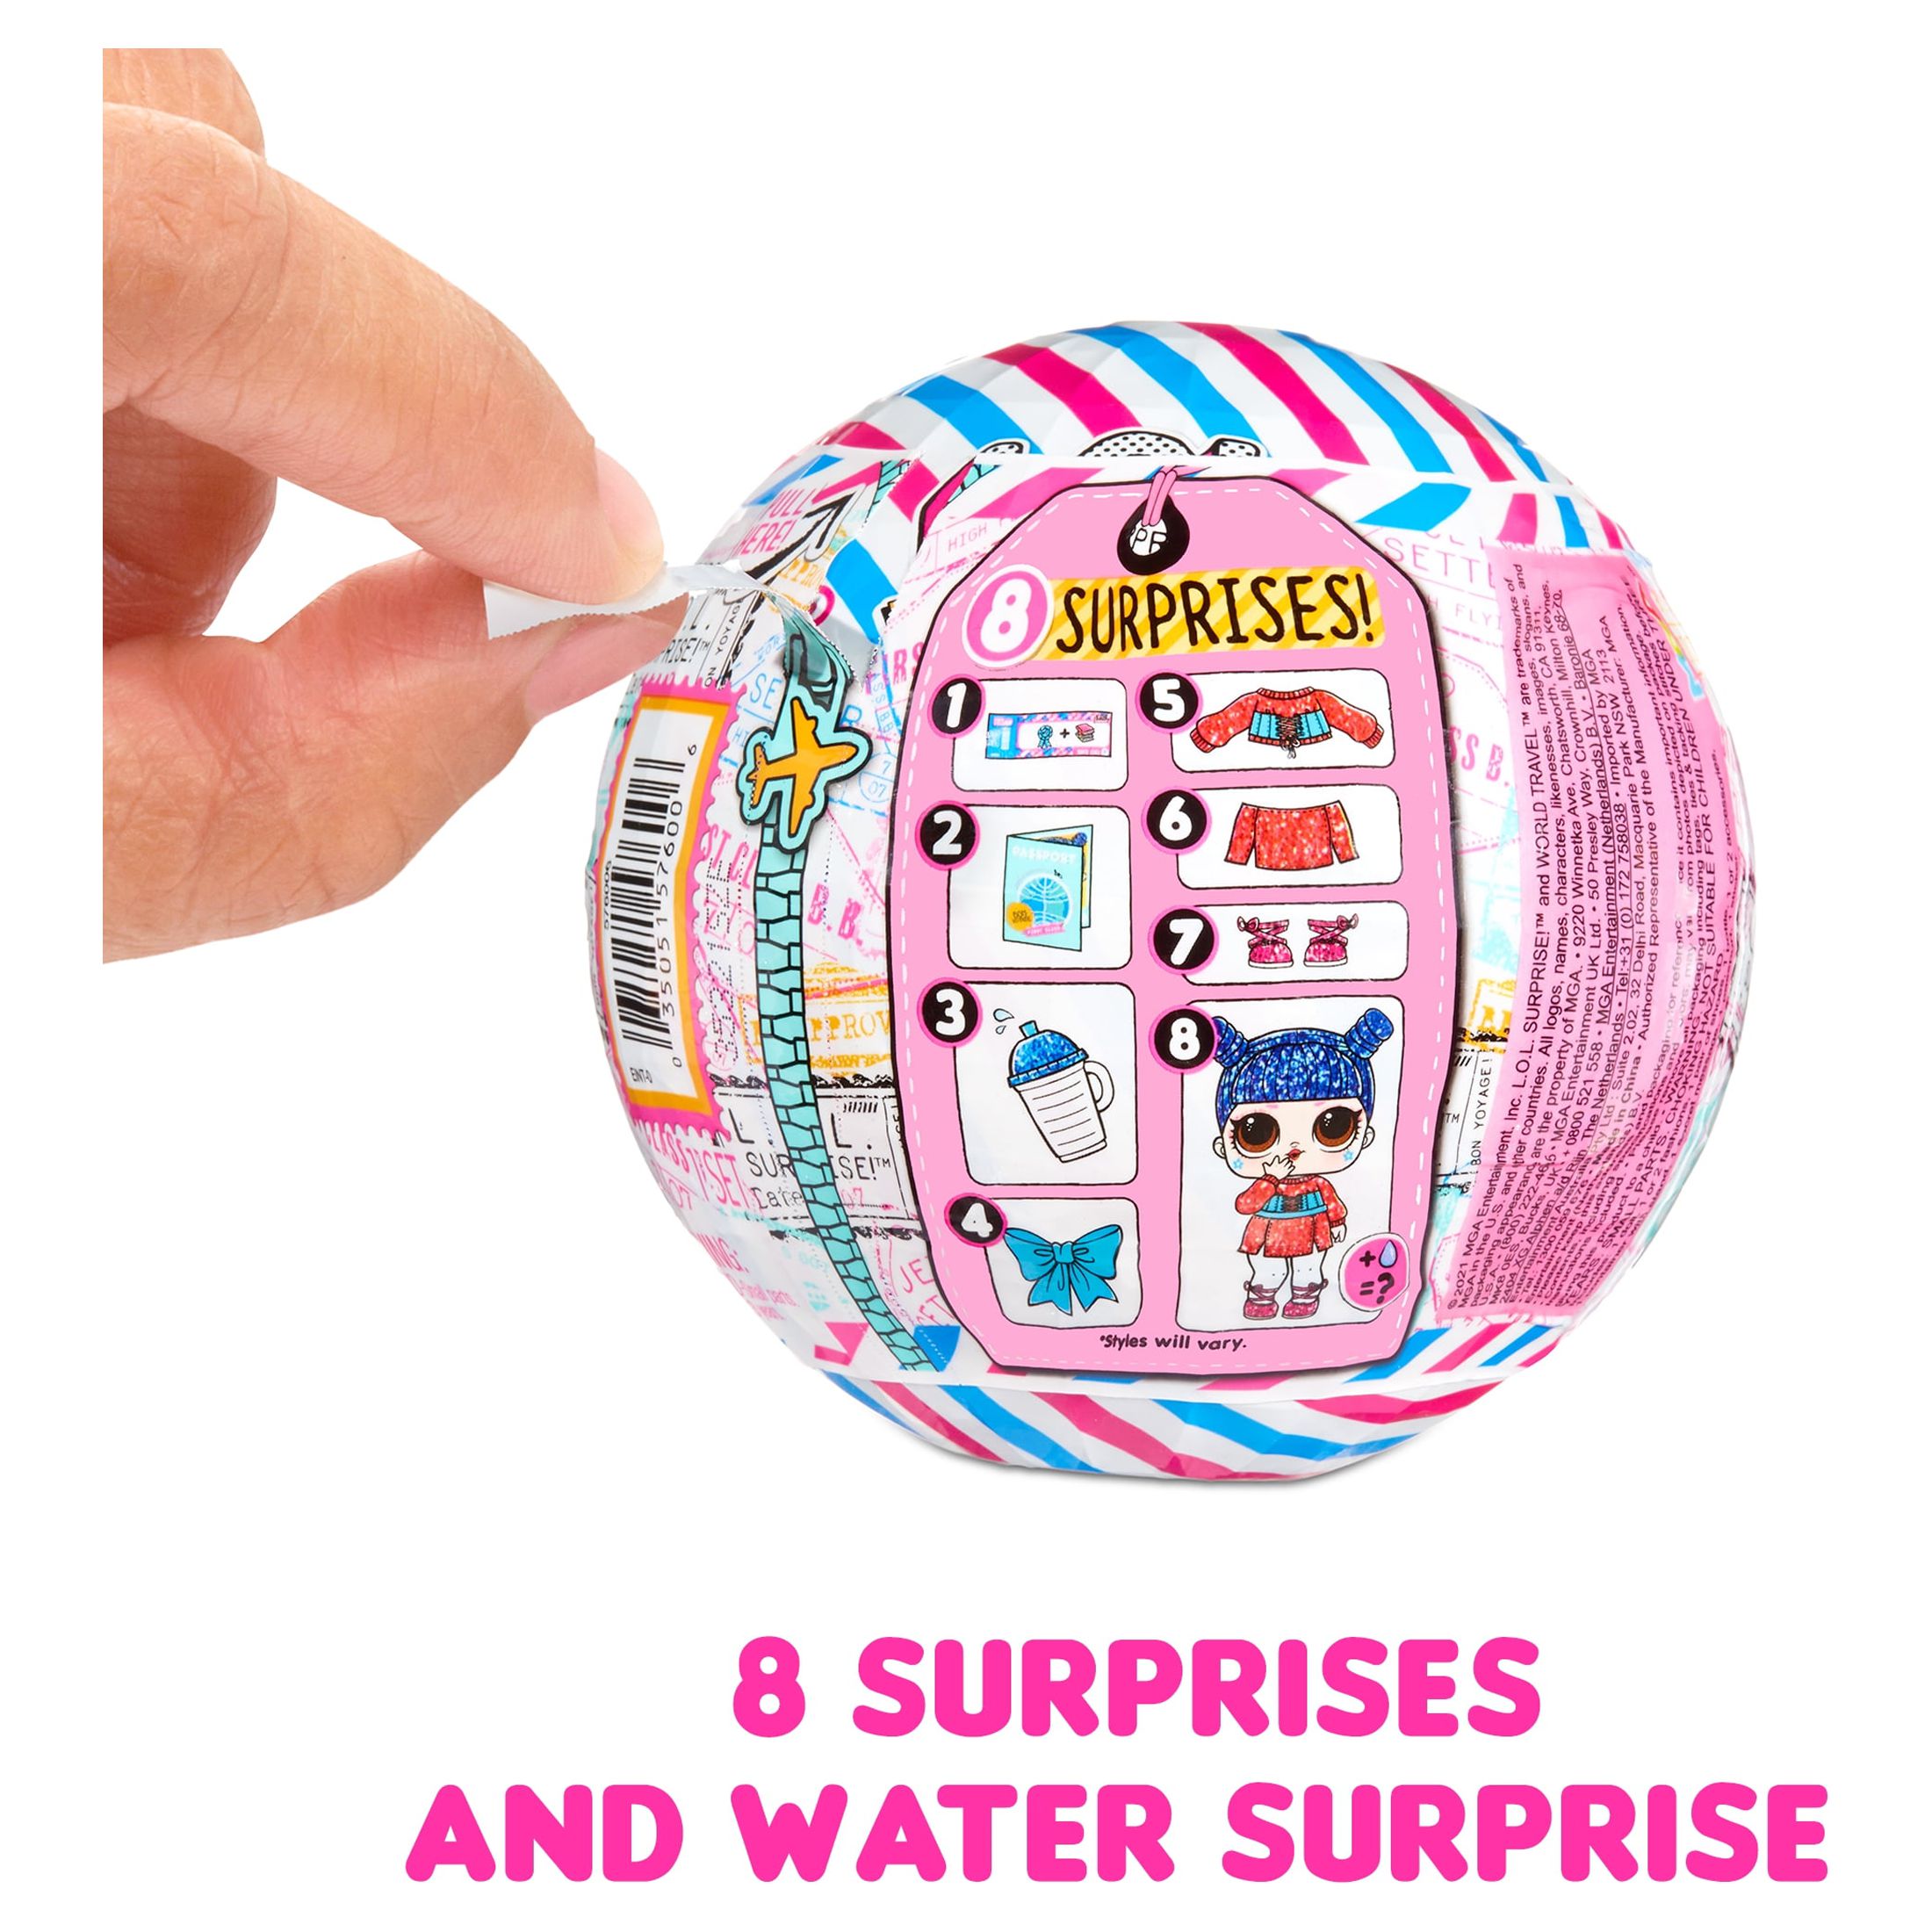 LOL Surprise World Travel™ Dolls with 8 Surprises Including Doll, Fashions, and Travel Themed Accessories - Great Gift for Girls Age 4+ - image 4 of 7